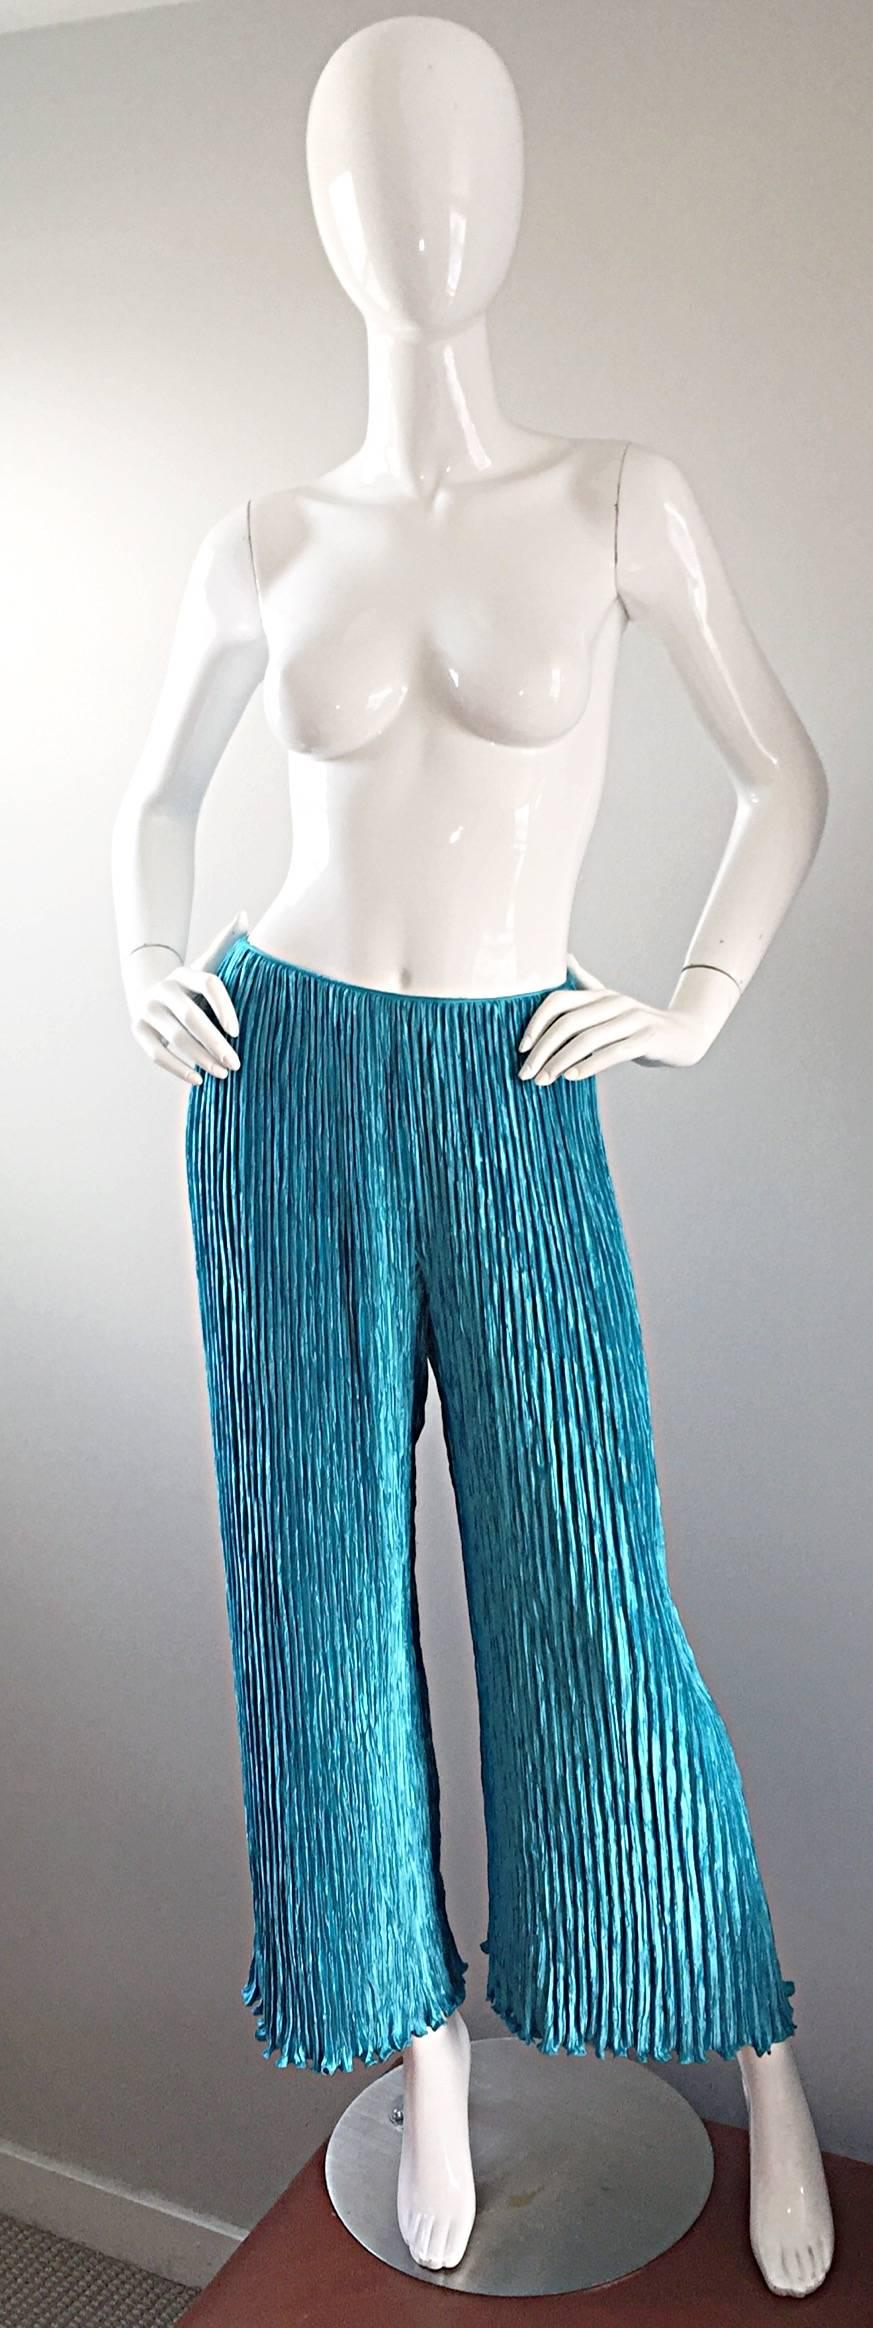 Amazing vintage 1980s / 80s MARY MCFADDEN COUTURE turquoise / teal blue silk Fortuny pleated wide leg palazzo trousers! Vibrant turquoise color, with signature McFadden Fortuny pleating. Zips up center front with hook-and-eye closure at waistband.